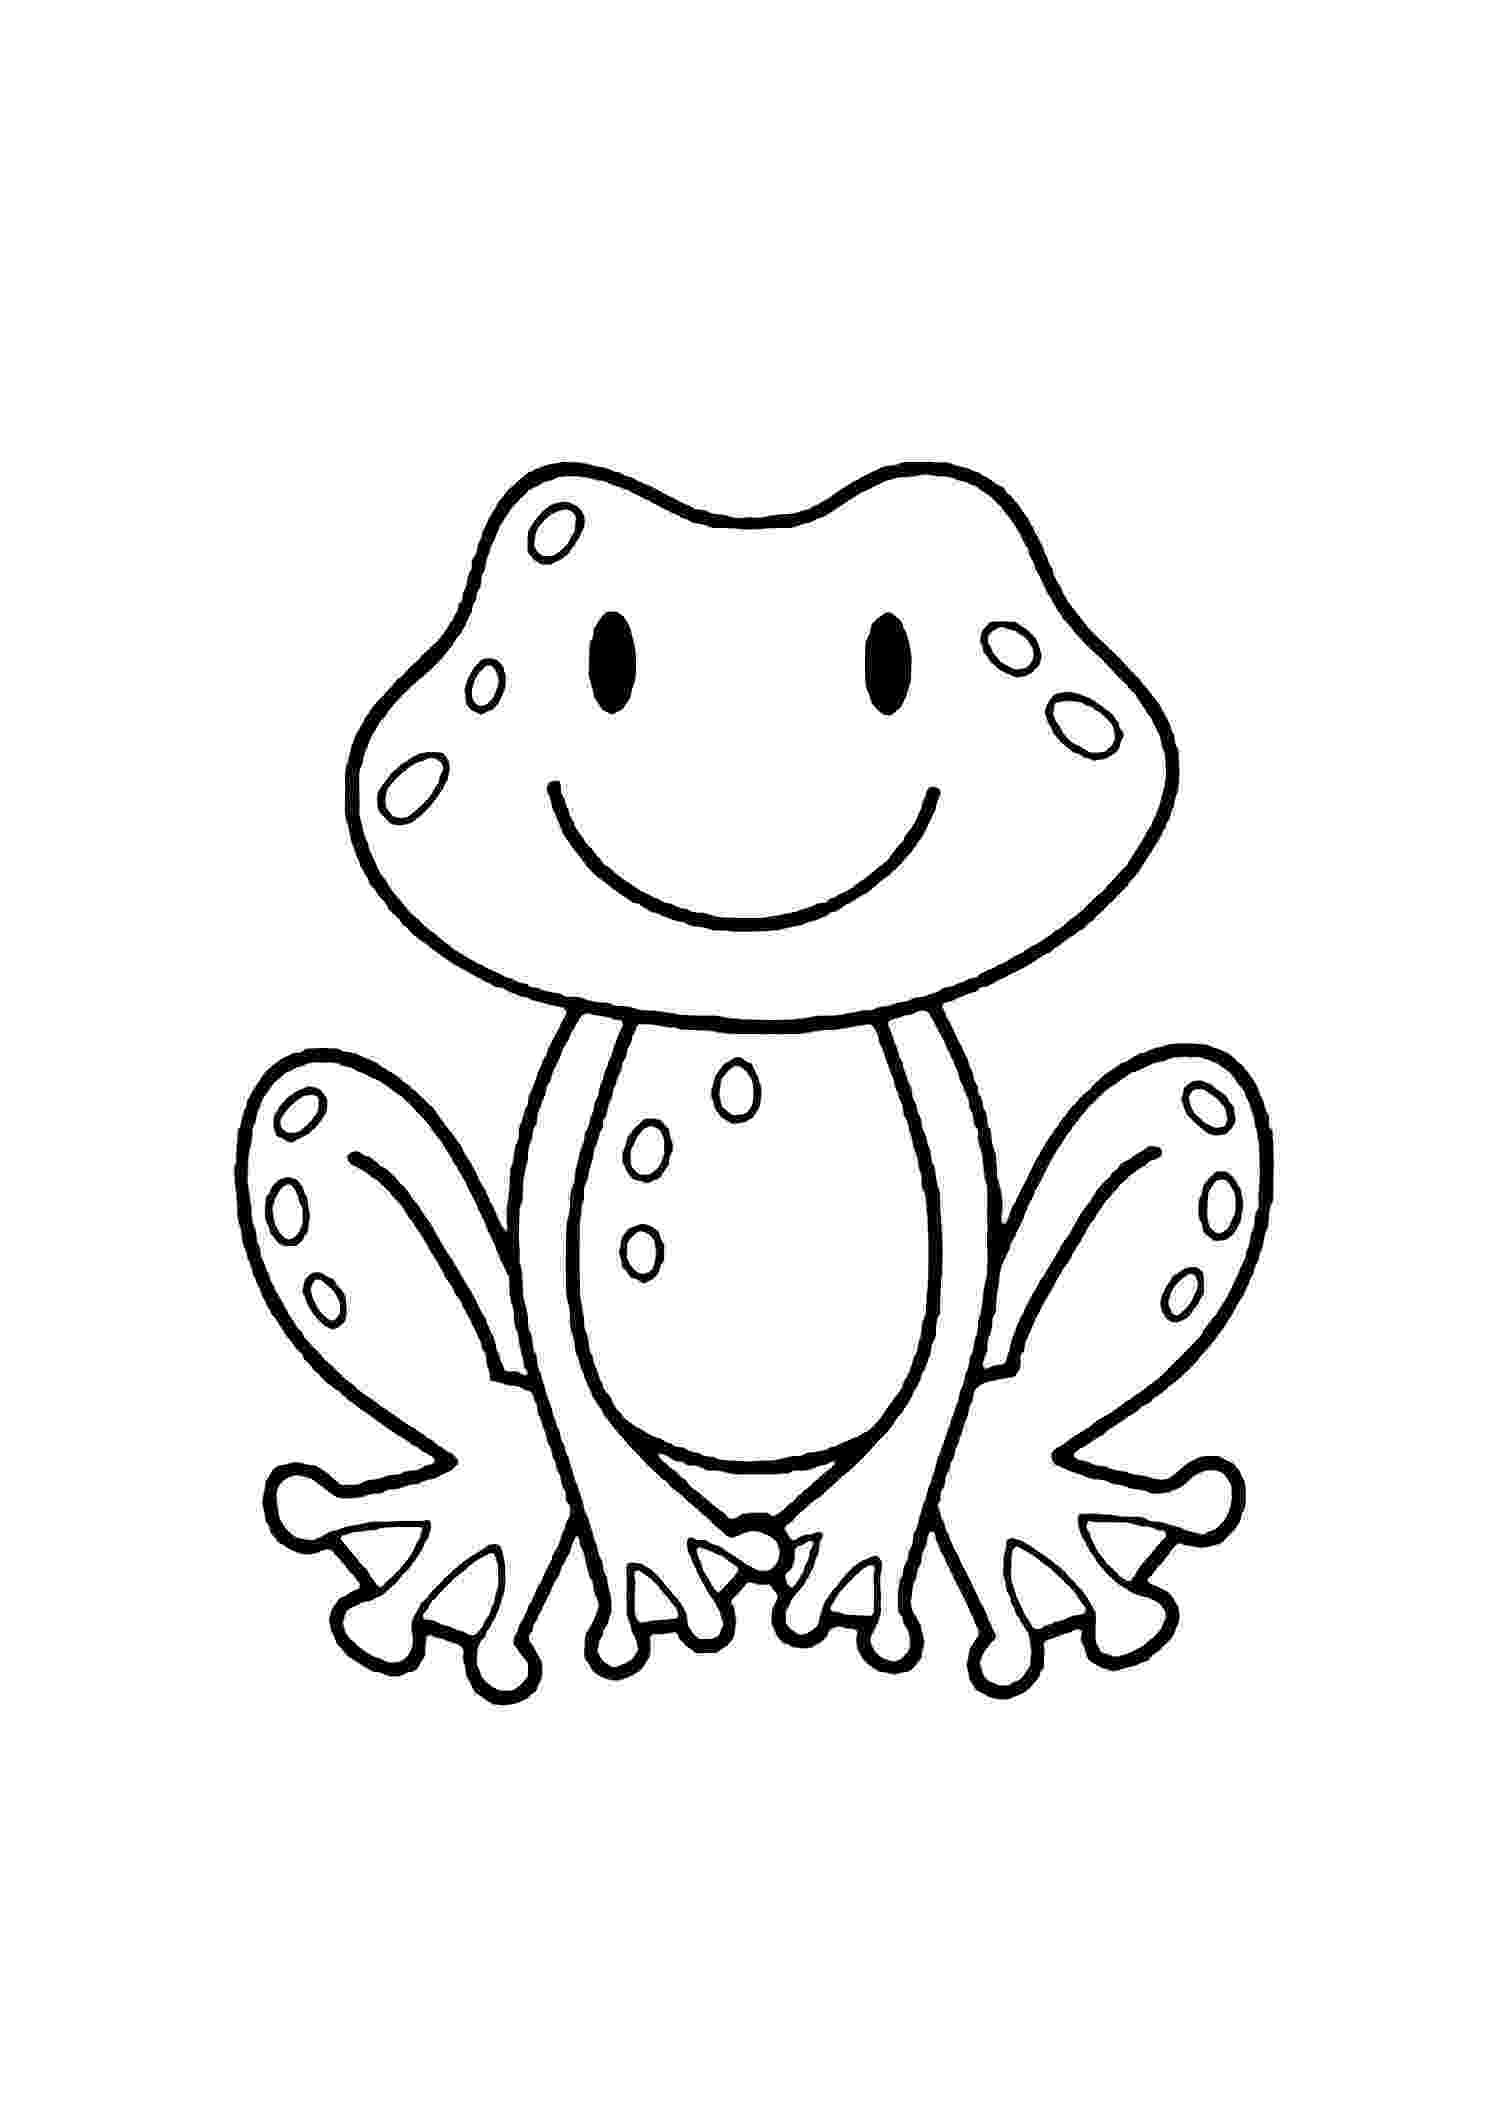 frogs coloring pages frogs coloring pages to download and print for free coloring frogs pages 